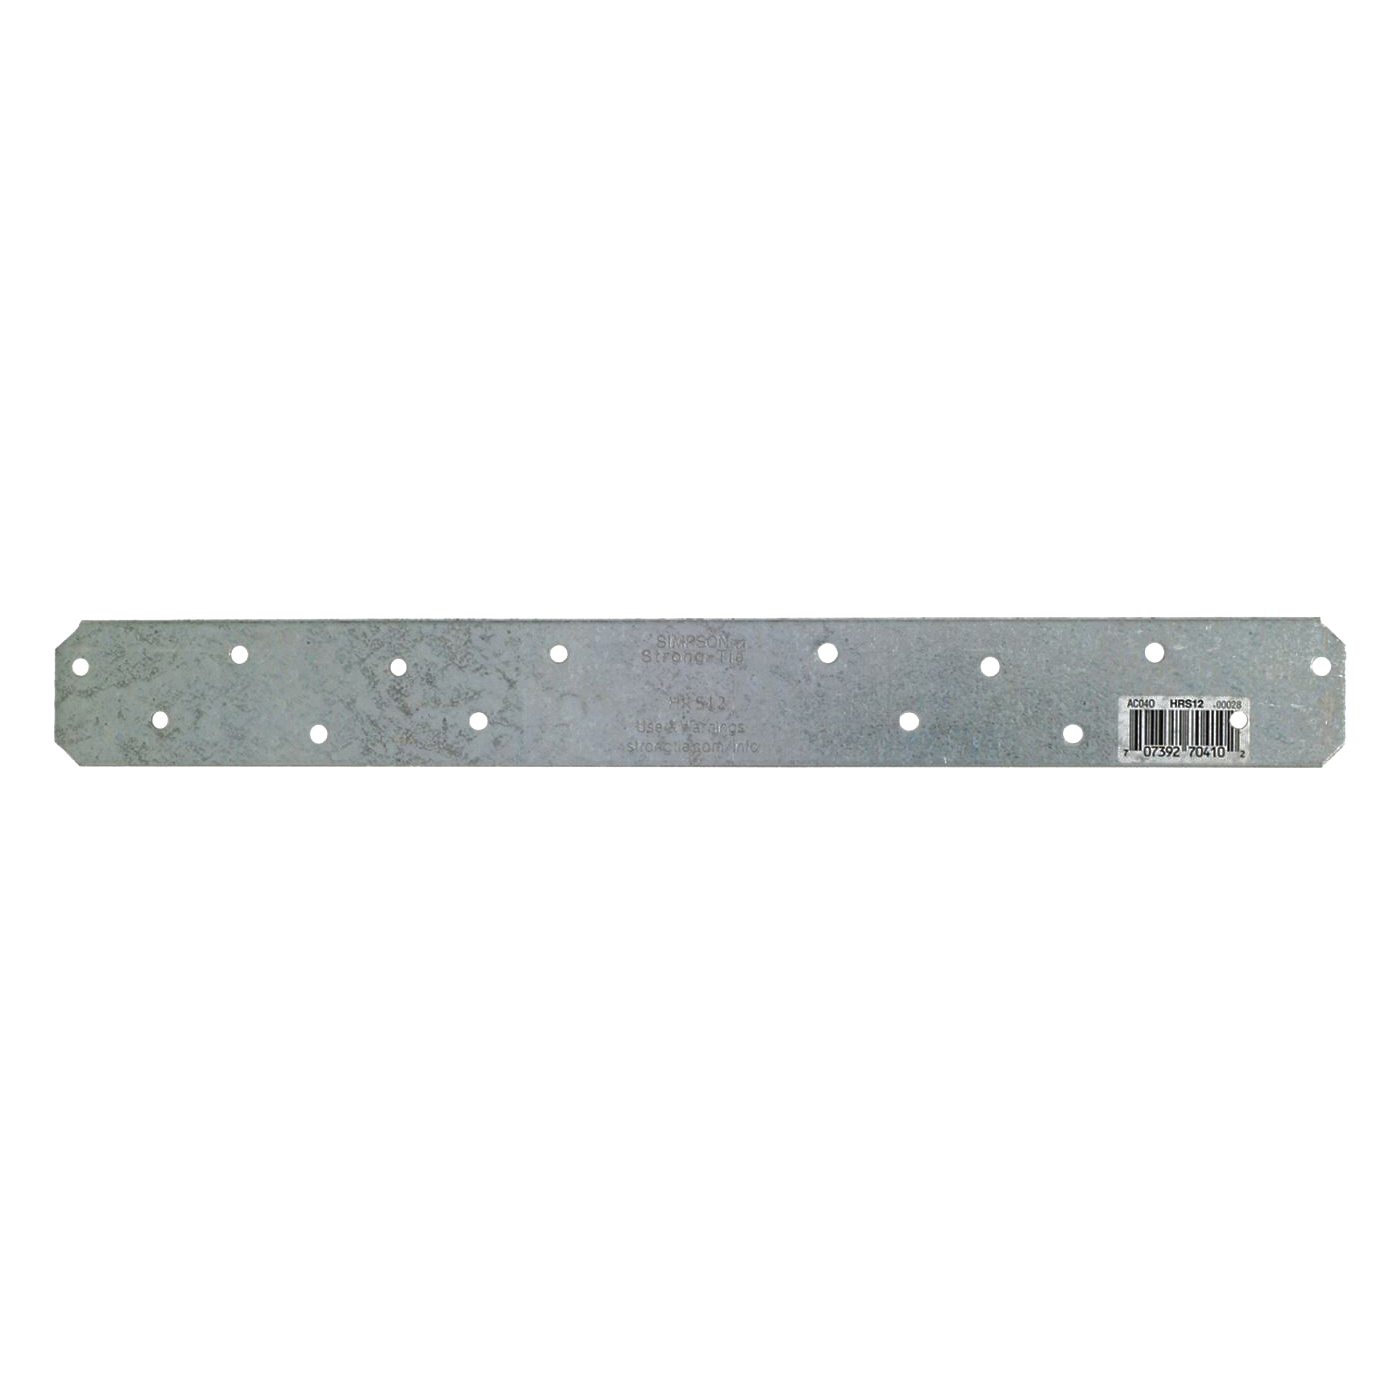 Simpson Strong-Tie HRS Series HRS6 Strap Tie, 6 in L, 1-3/8 in W, Steel, Galvanized, Fastening Method: Nail - 1